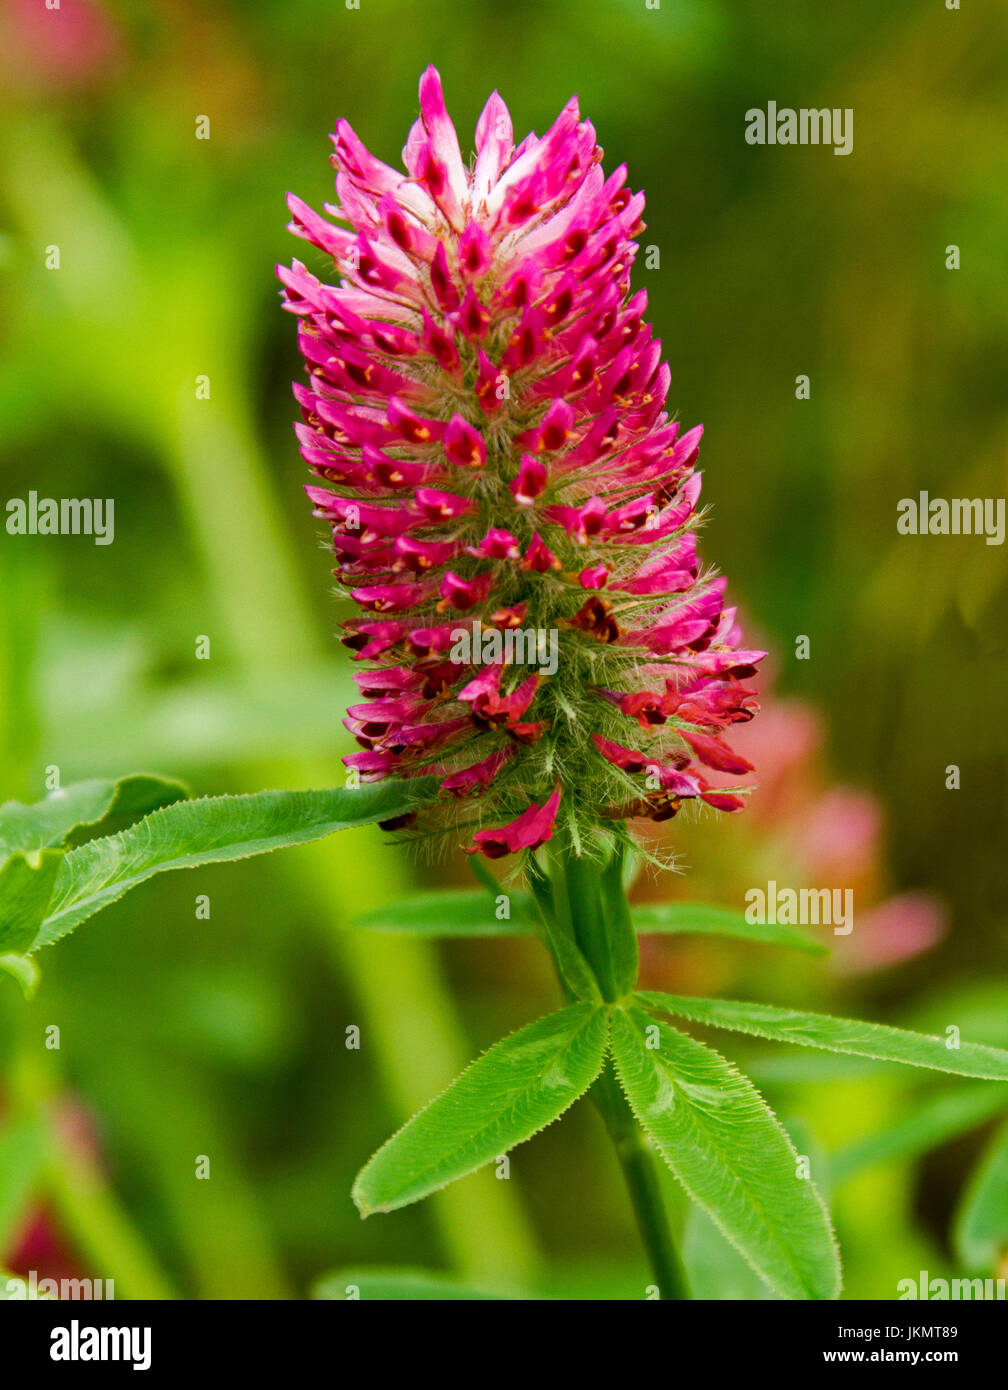 Bright red flower of Trifolium rubens, ornamental clover / red trefoil, with green leaves and against background of emerald foliage Stock Photo